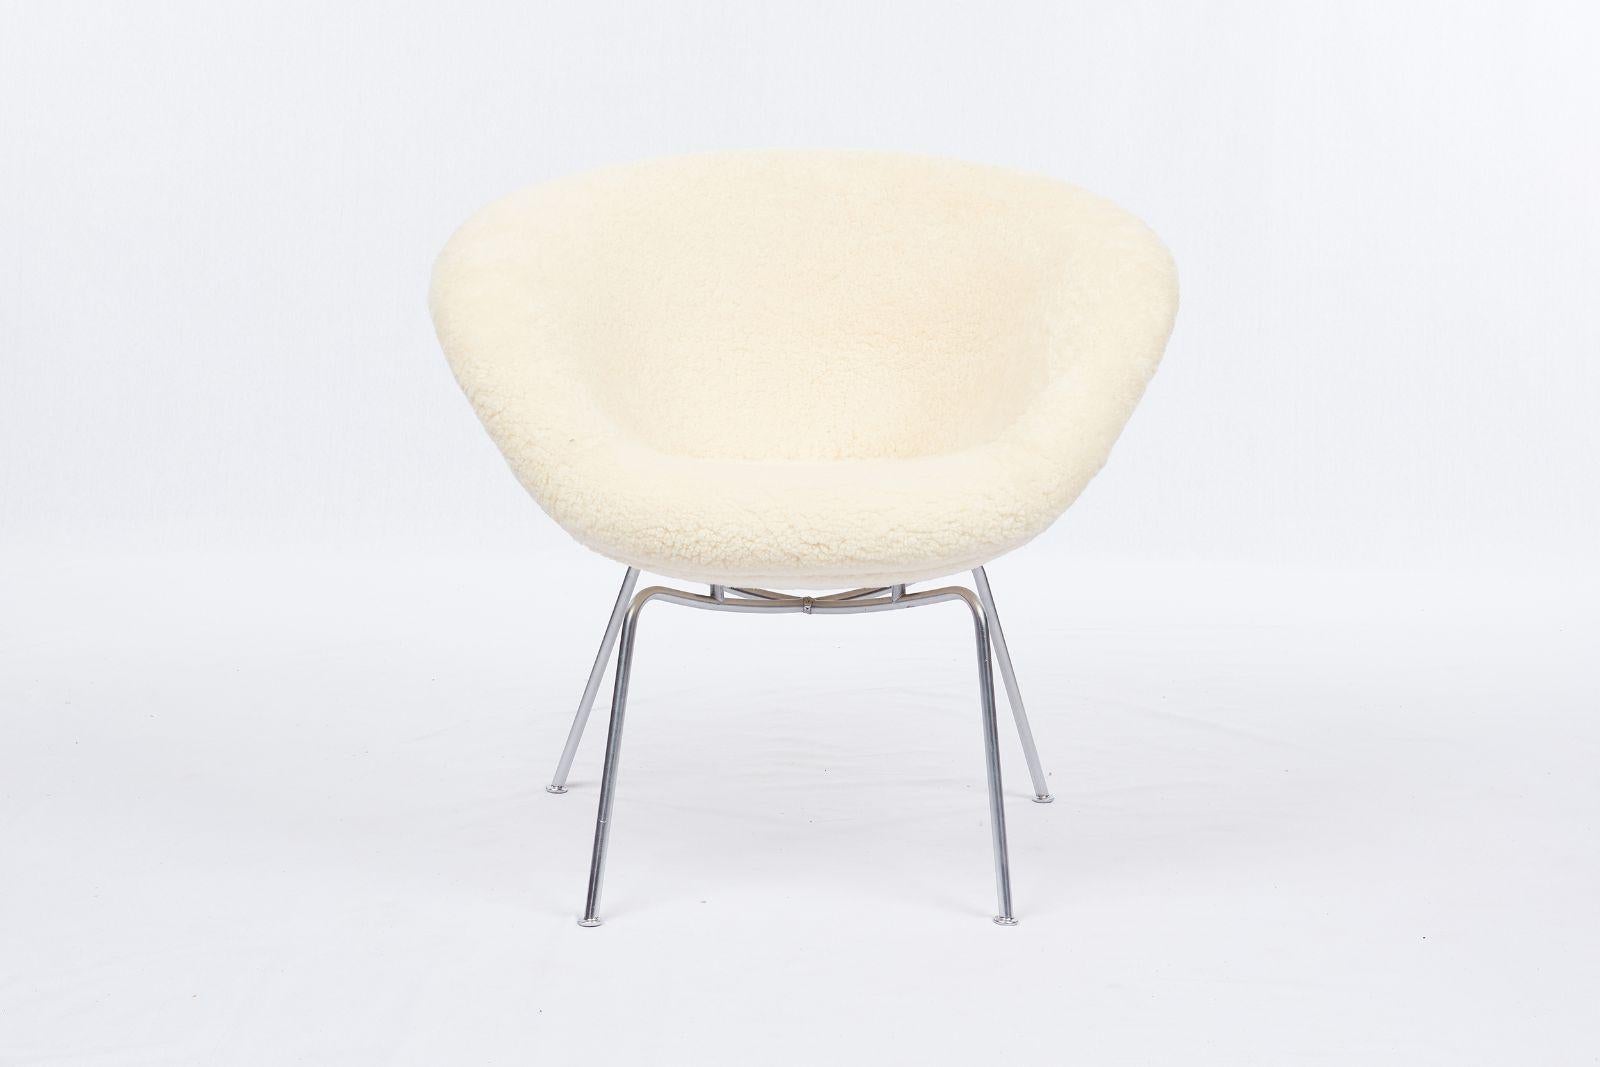 Arne Jacobsen pot chair designed in 1959 and produced by Fritz Hansen.